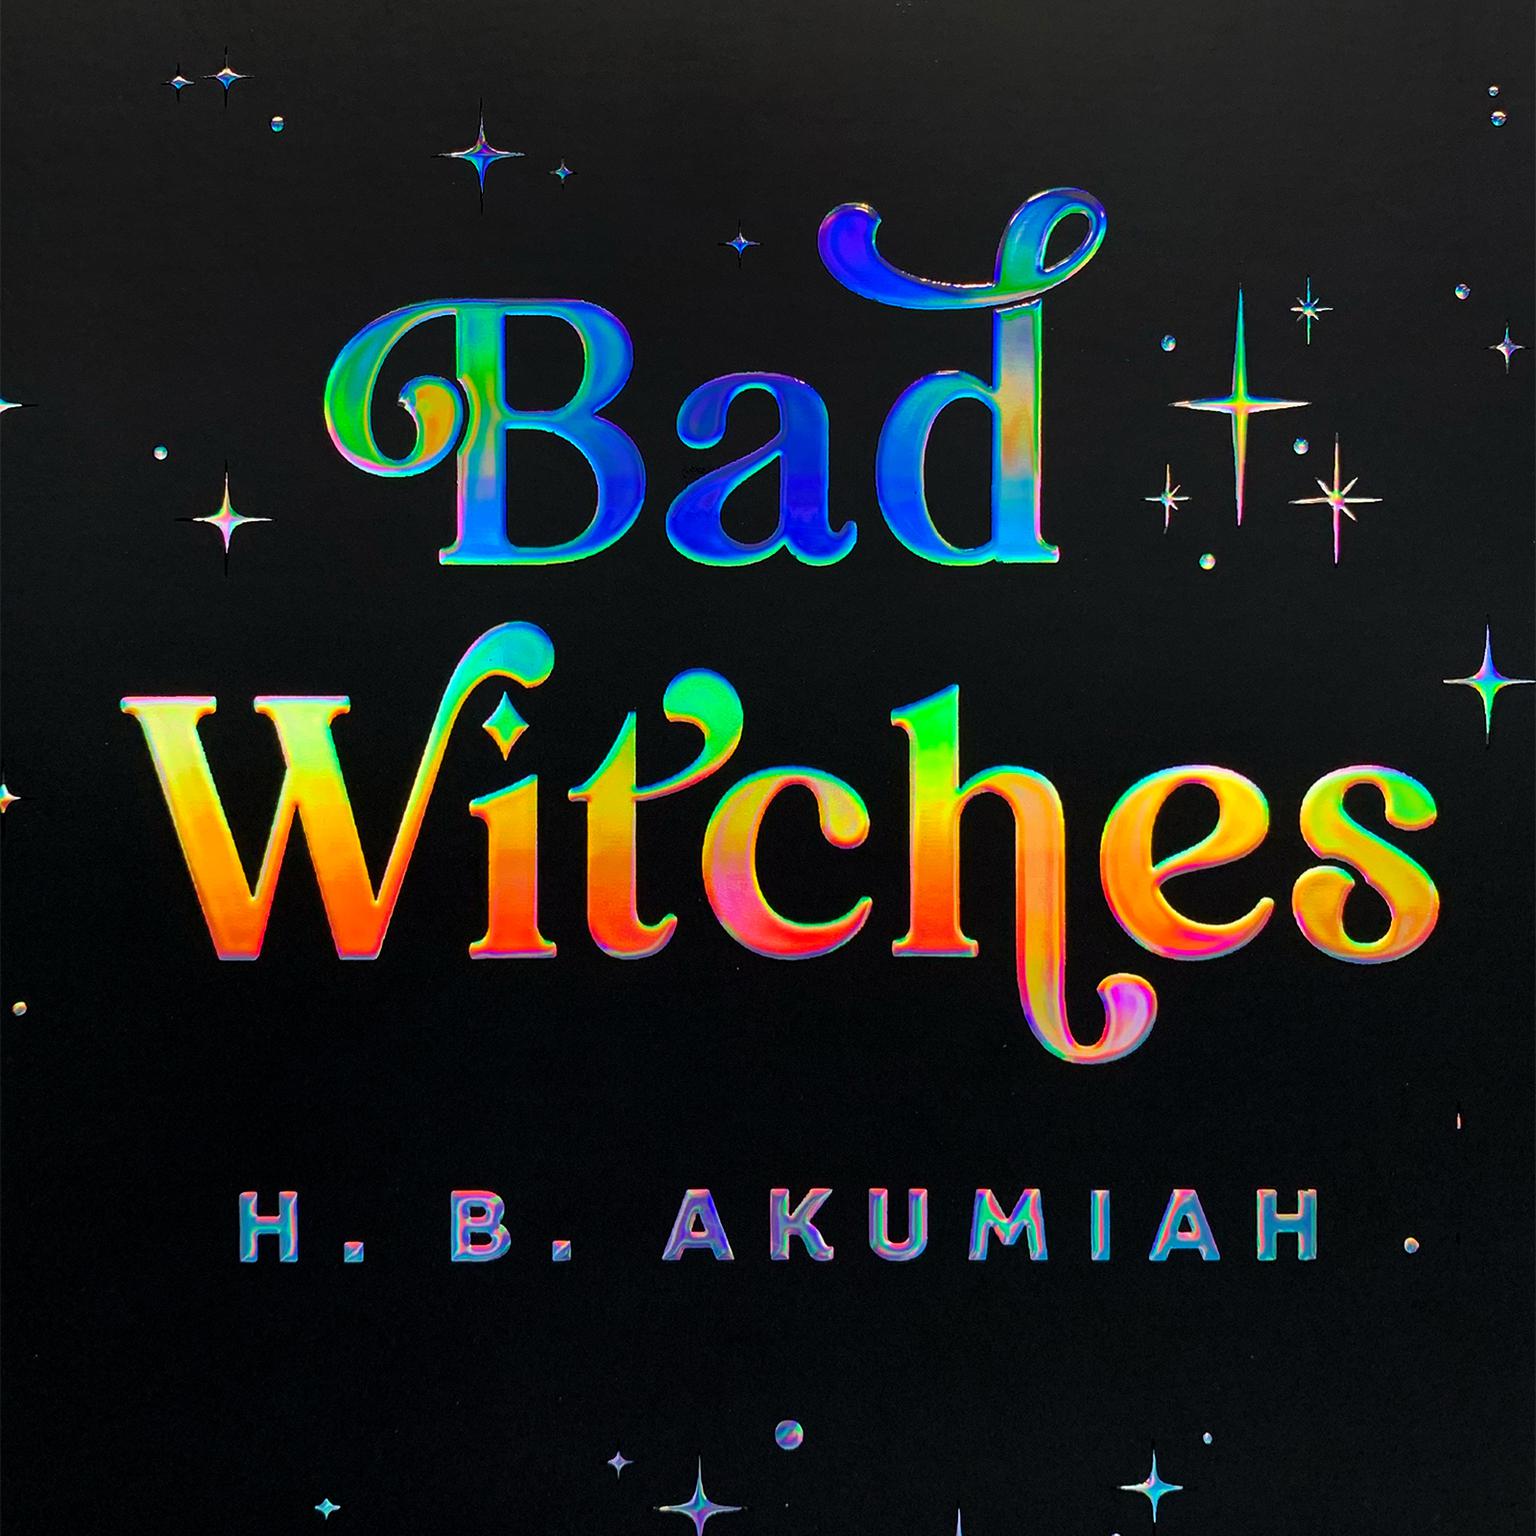 Bad Witches Audiobook, by Heather Akumiah